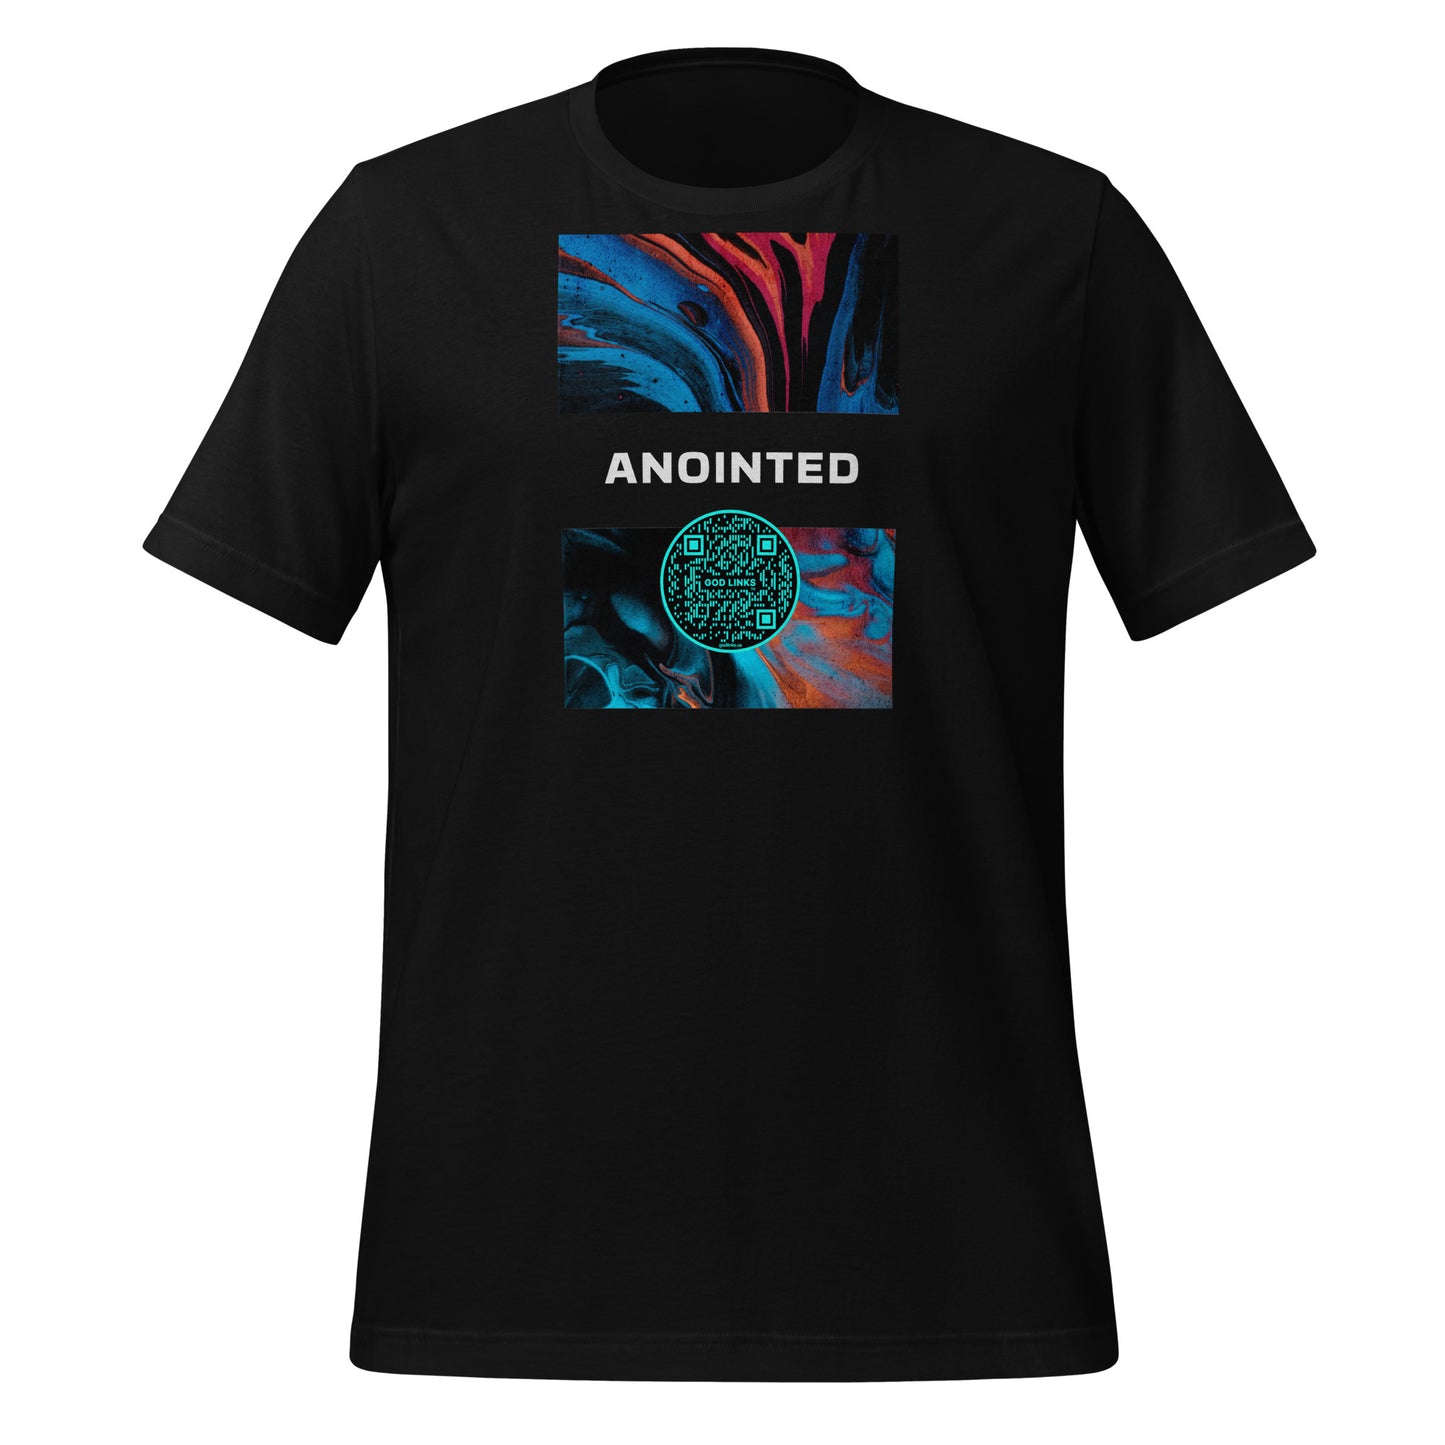 ANOINTED-TEAL-Unisex t-shirt